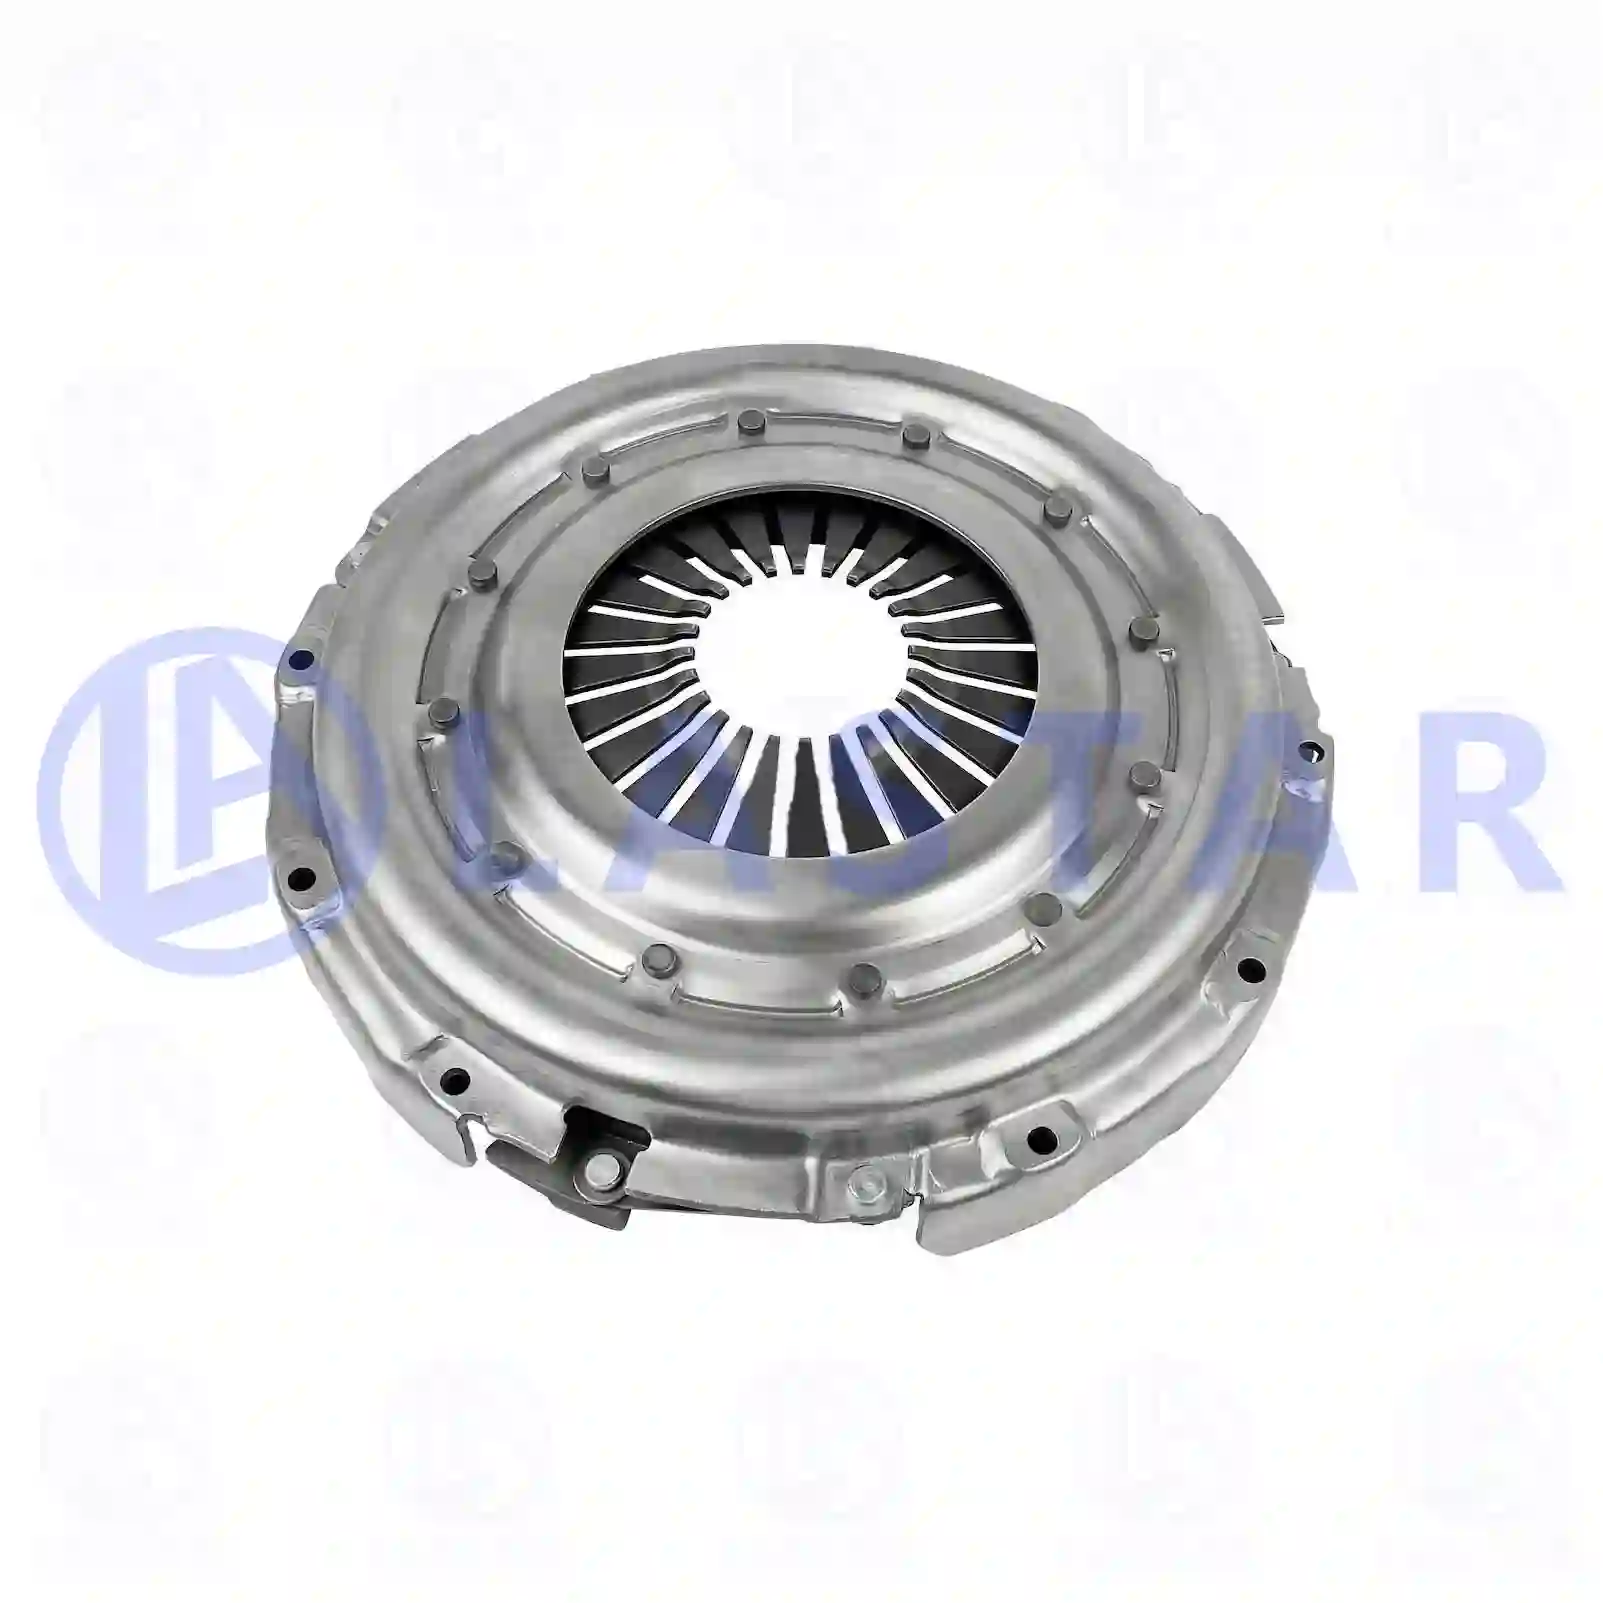 Clutch cover, 77722454, 0062503004, 0062506704, 006250670480, 0092504504, 0192506401, 019250640180, 0222508101 ||  77722454 Lastar Spare Part | Truck Spare Parts, Auotomotive Spare Parts Clutch cover, 77722454, 0062503004, 0062506704, 006250670480, 0092504504, 0192506401, 019250640180, 0222508101 ||  77722454 Lastar Spare Part | Truck Spare Parts, Auotomotive Spare Parts